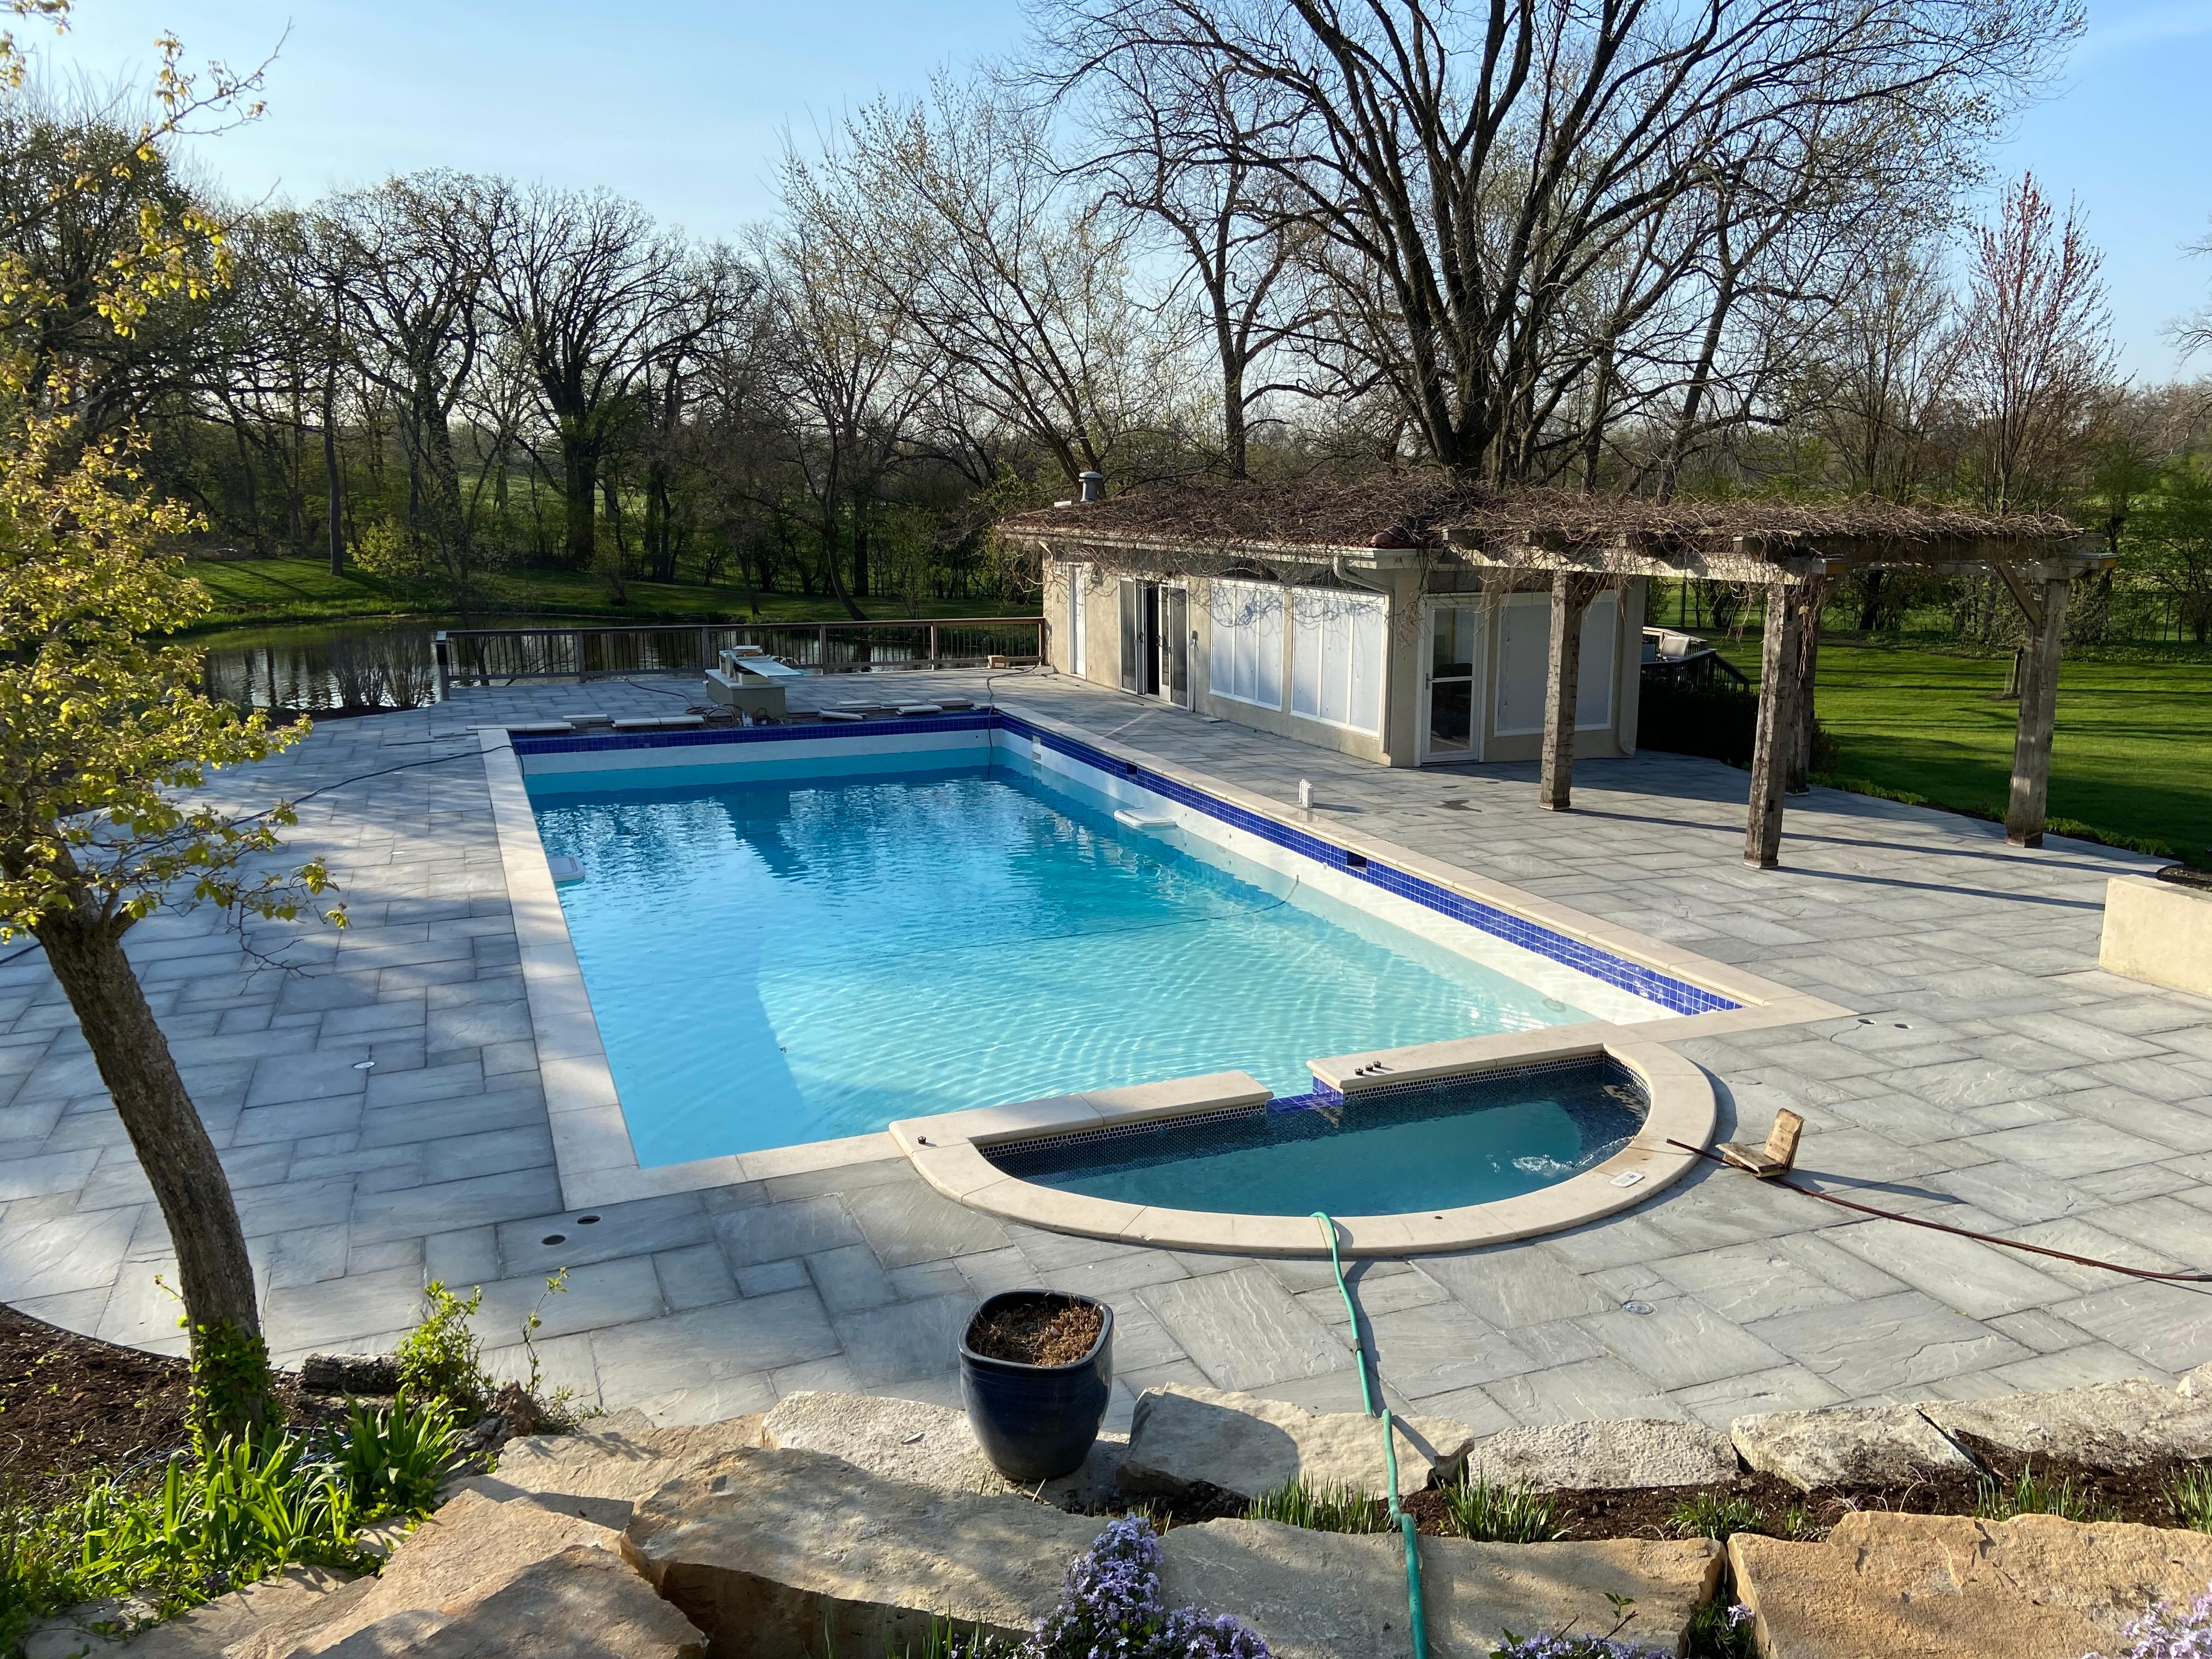 Fiberglass, Vinyl Liner and Concrete Inground Pools – The Pros and Cons